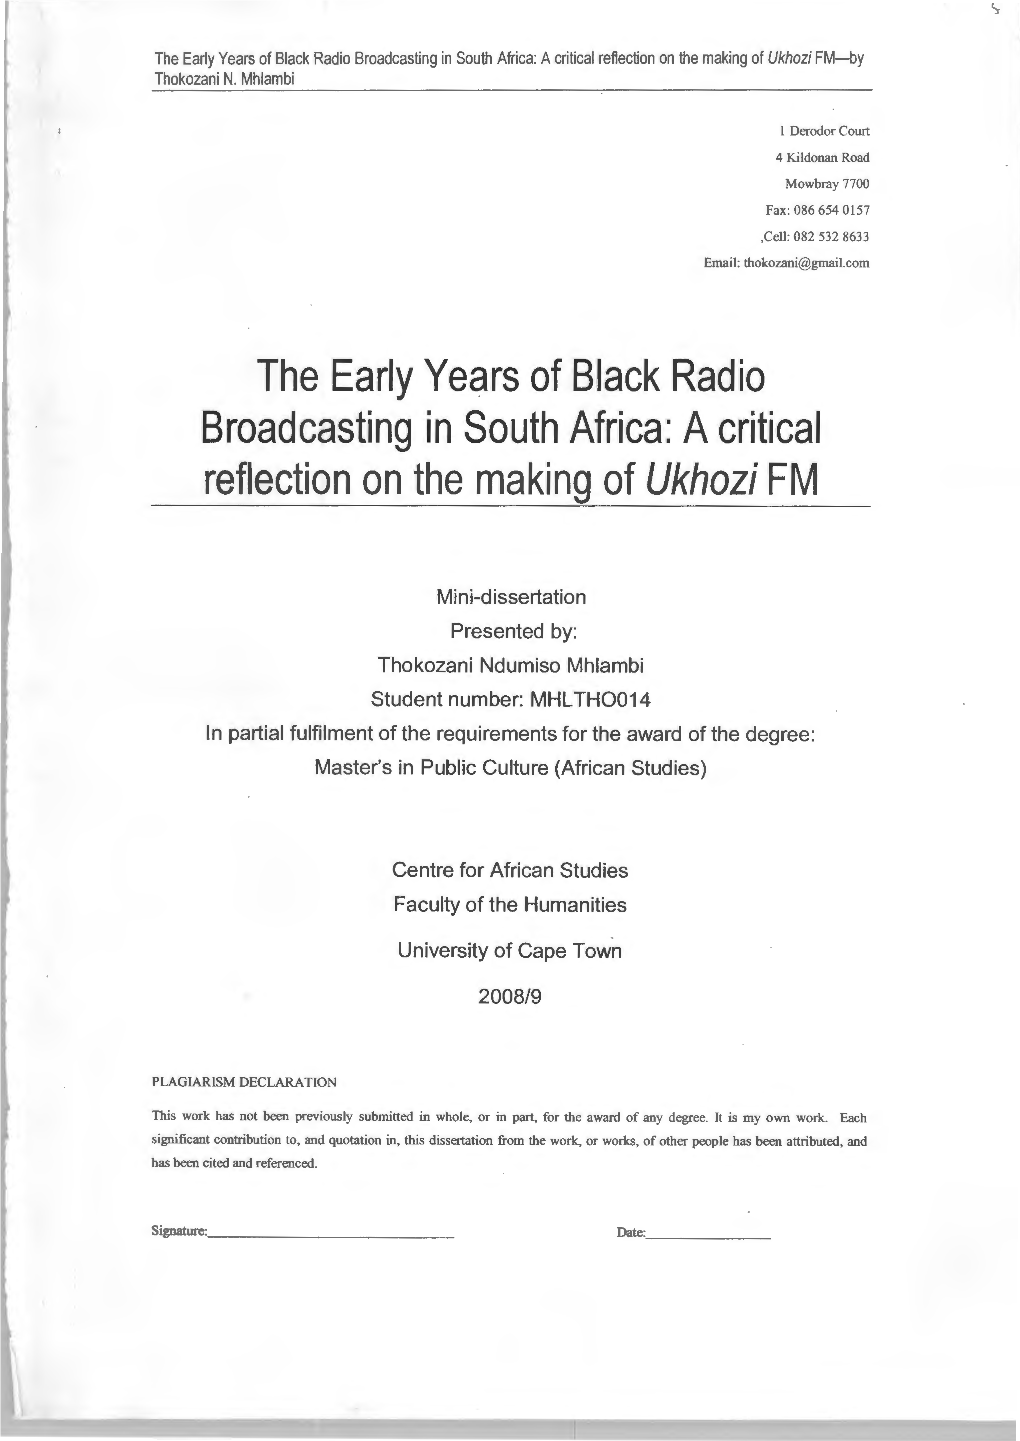 The Early Years of Black Radio Broadcasting in South Africa: a Critical Reflection on the Making of Ukhozi FM-By Thokozani N